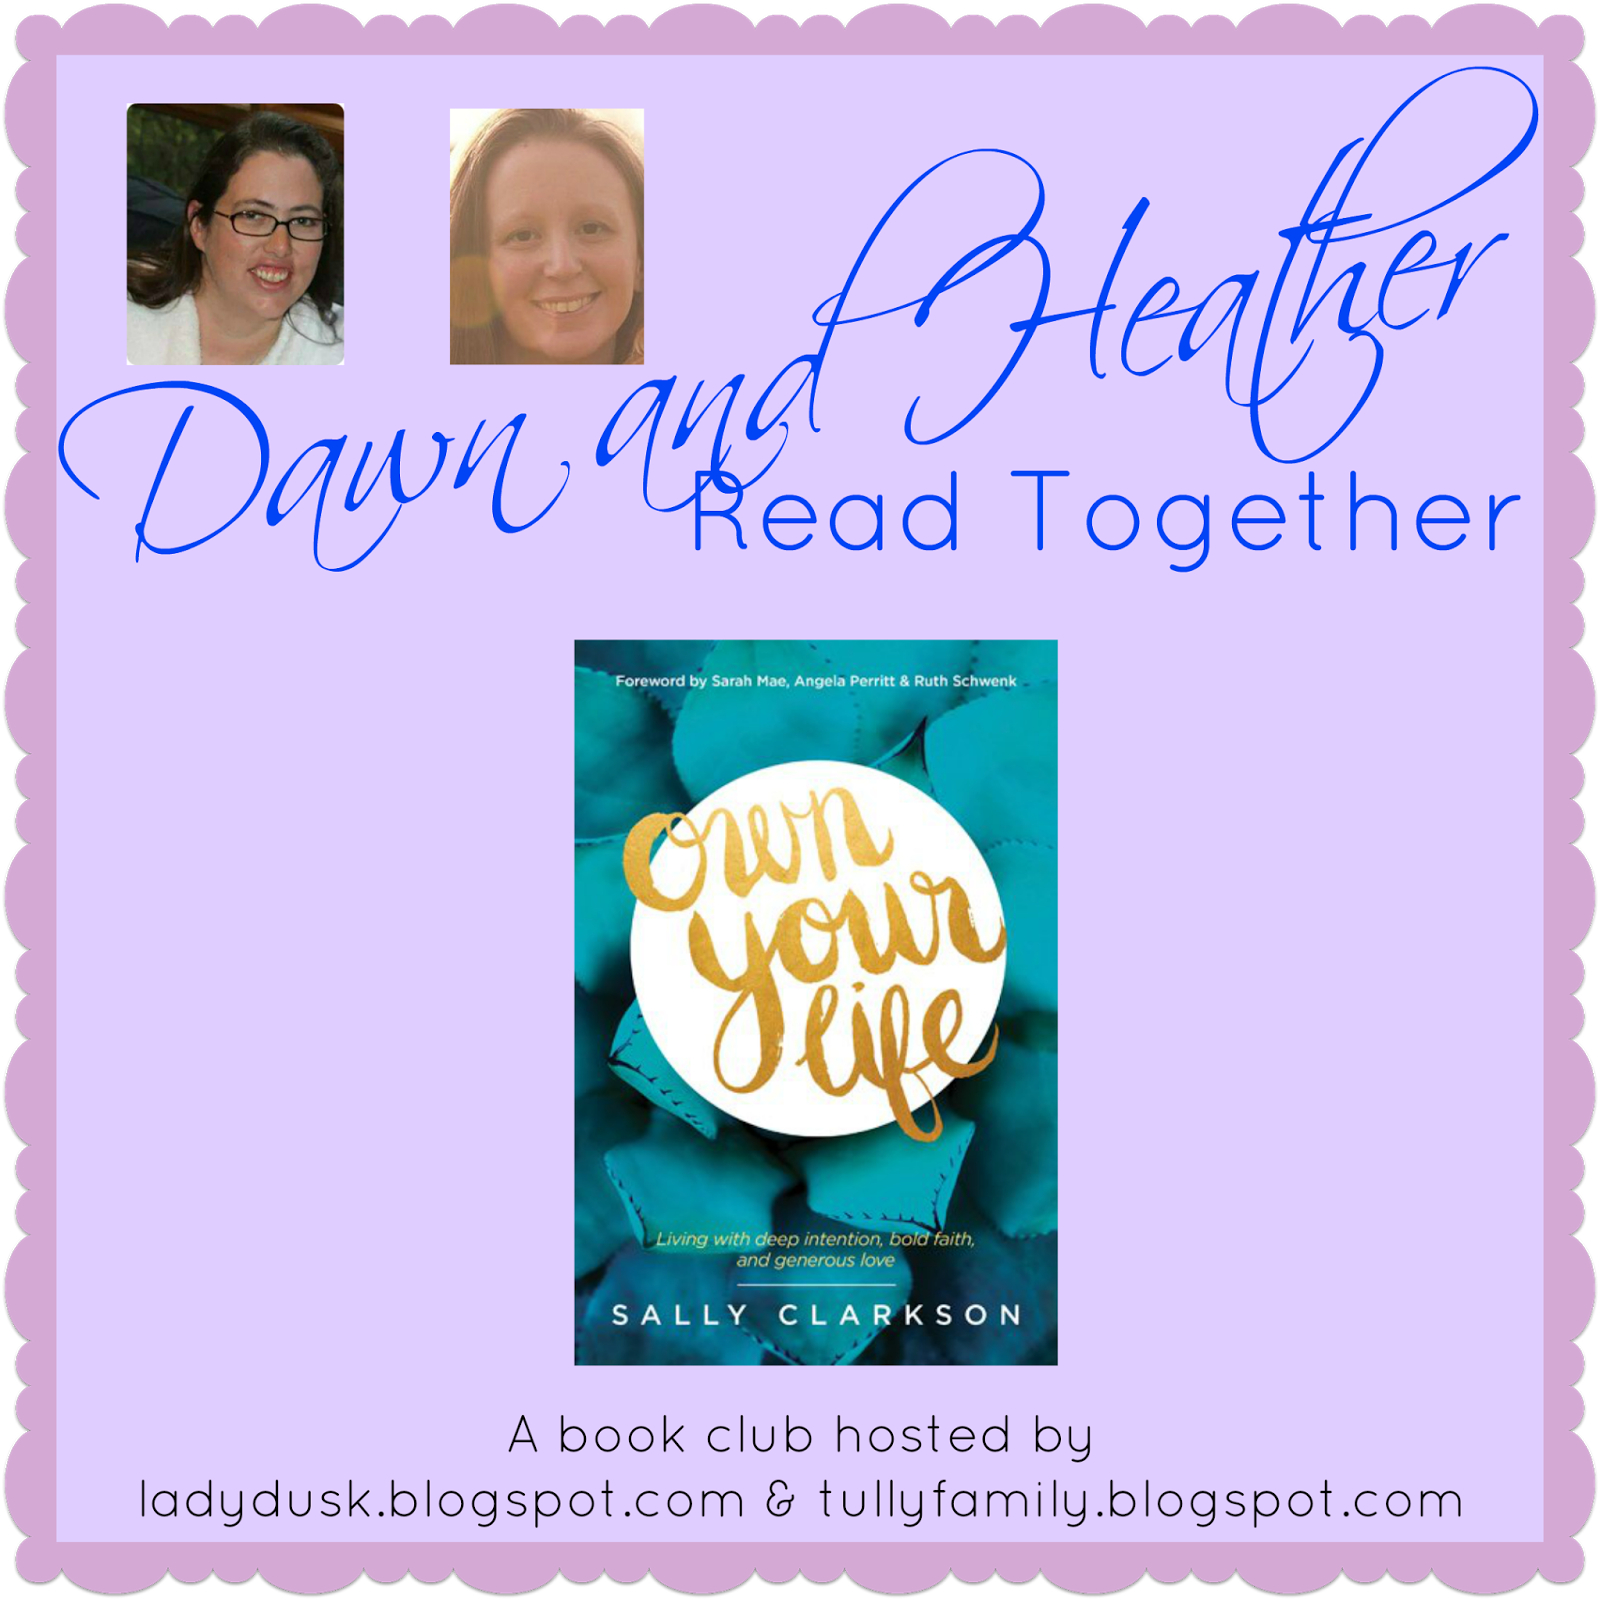 Dawn and Heather Read Together: Own Your Life (Chapter 2)